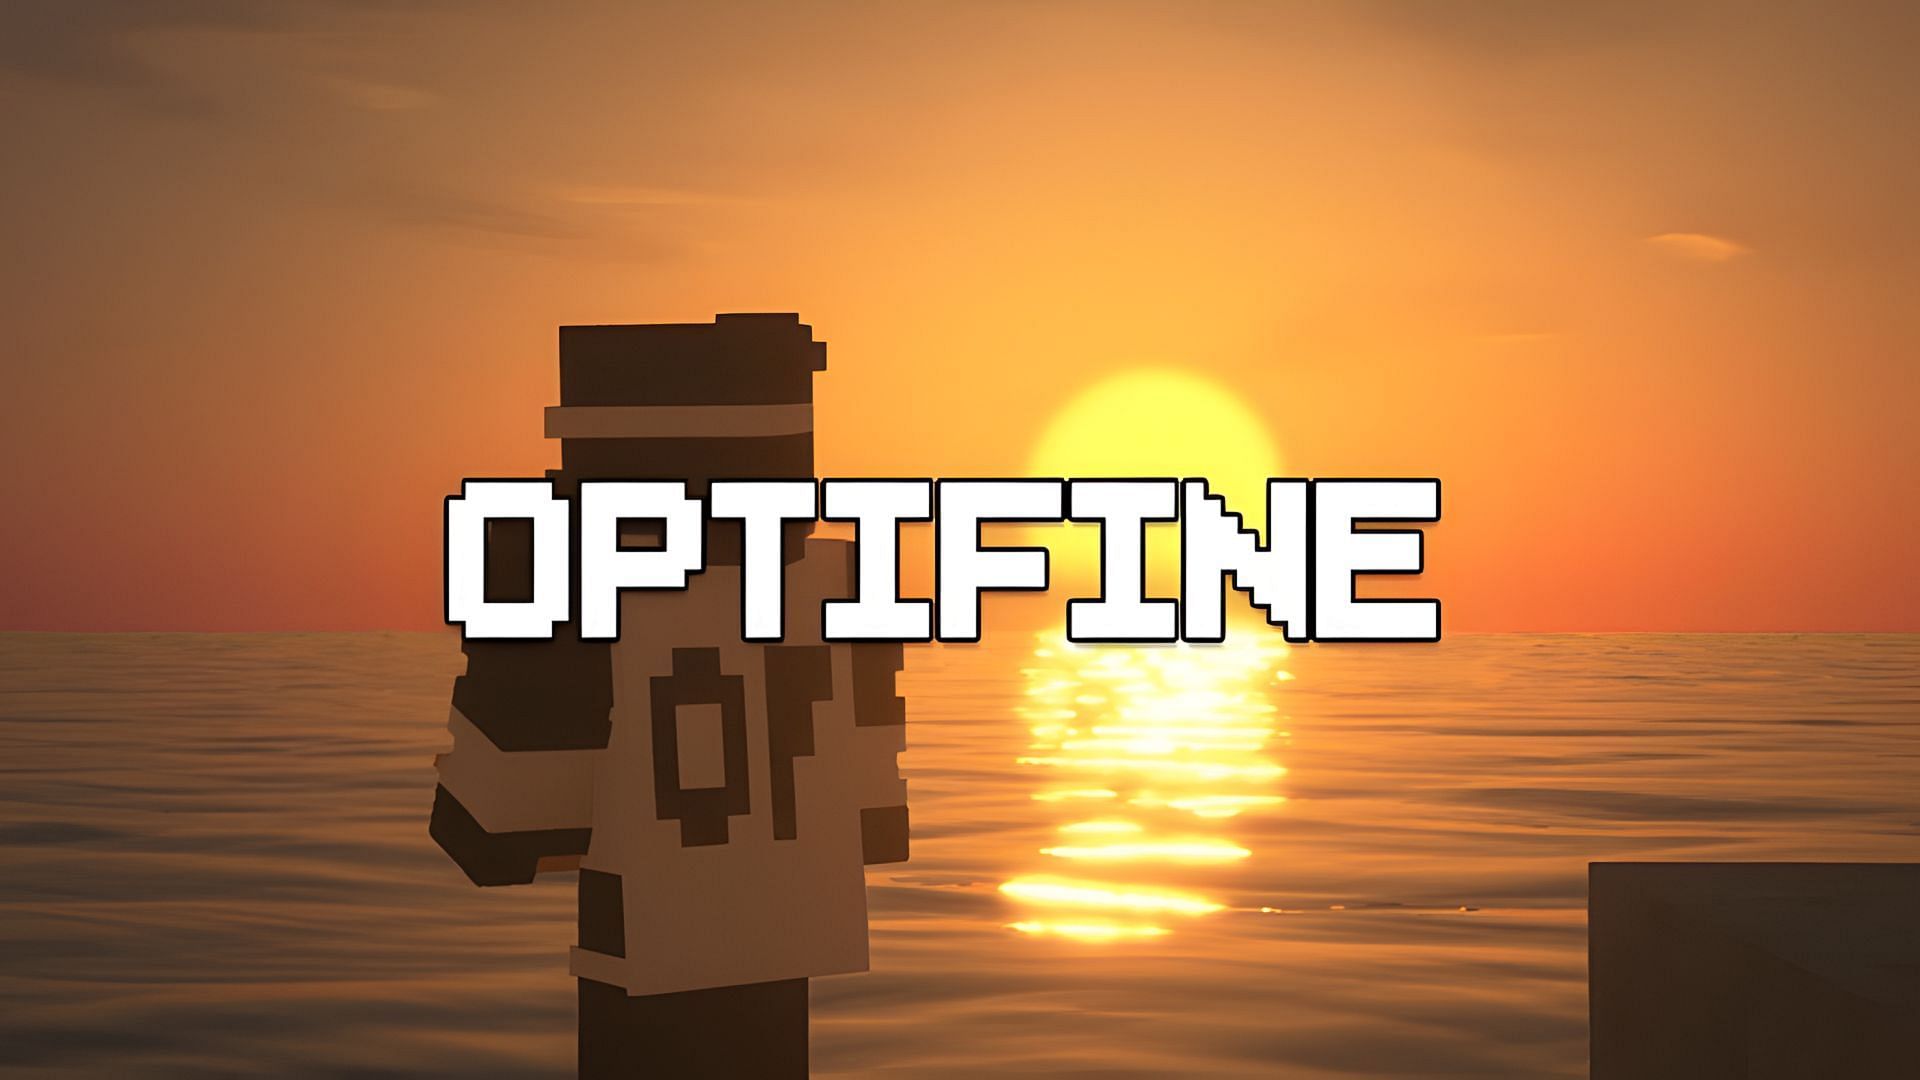 Optifine is one of the most beloved Minecraft mods among community members (Image via Optifine.net)